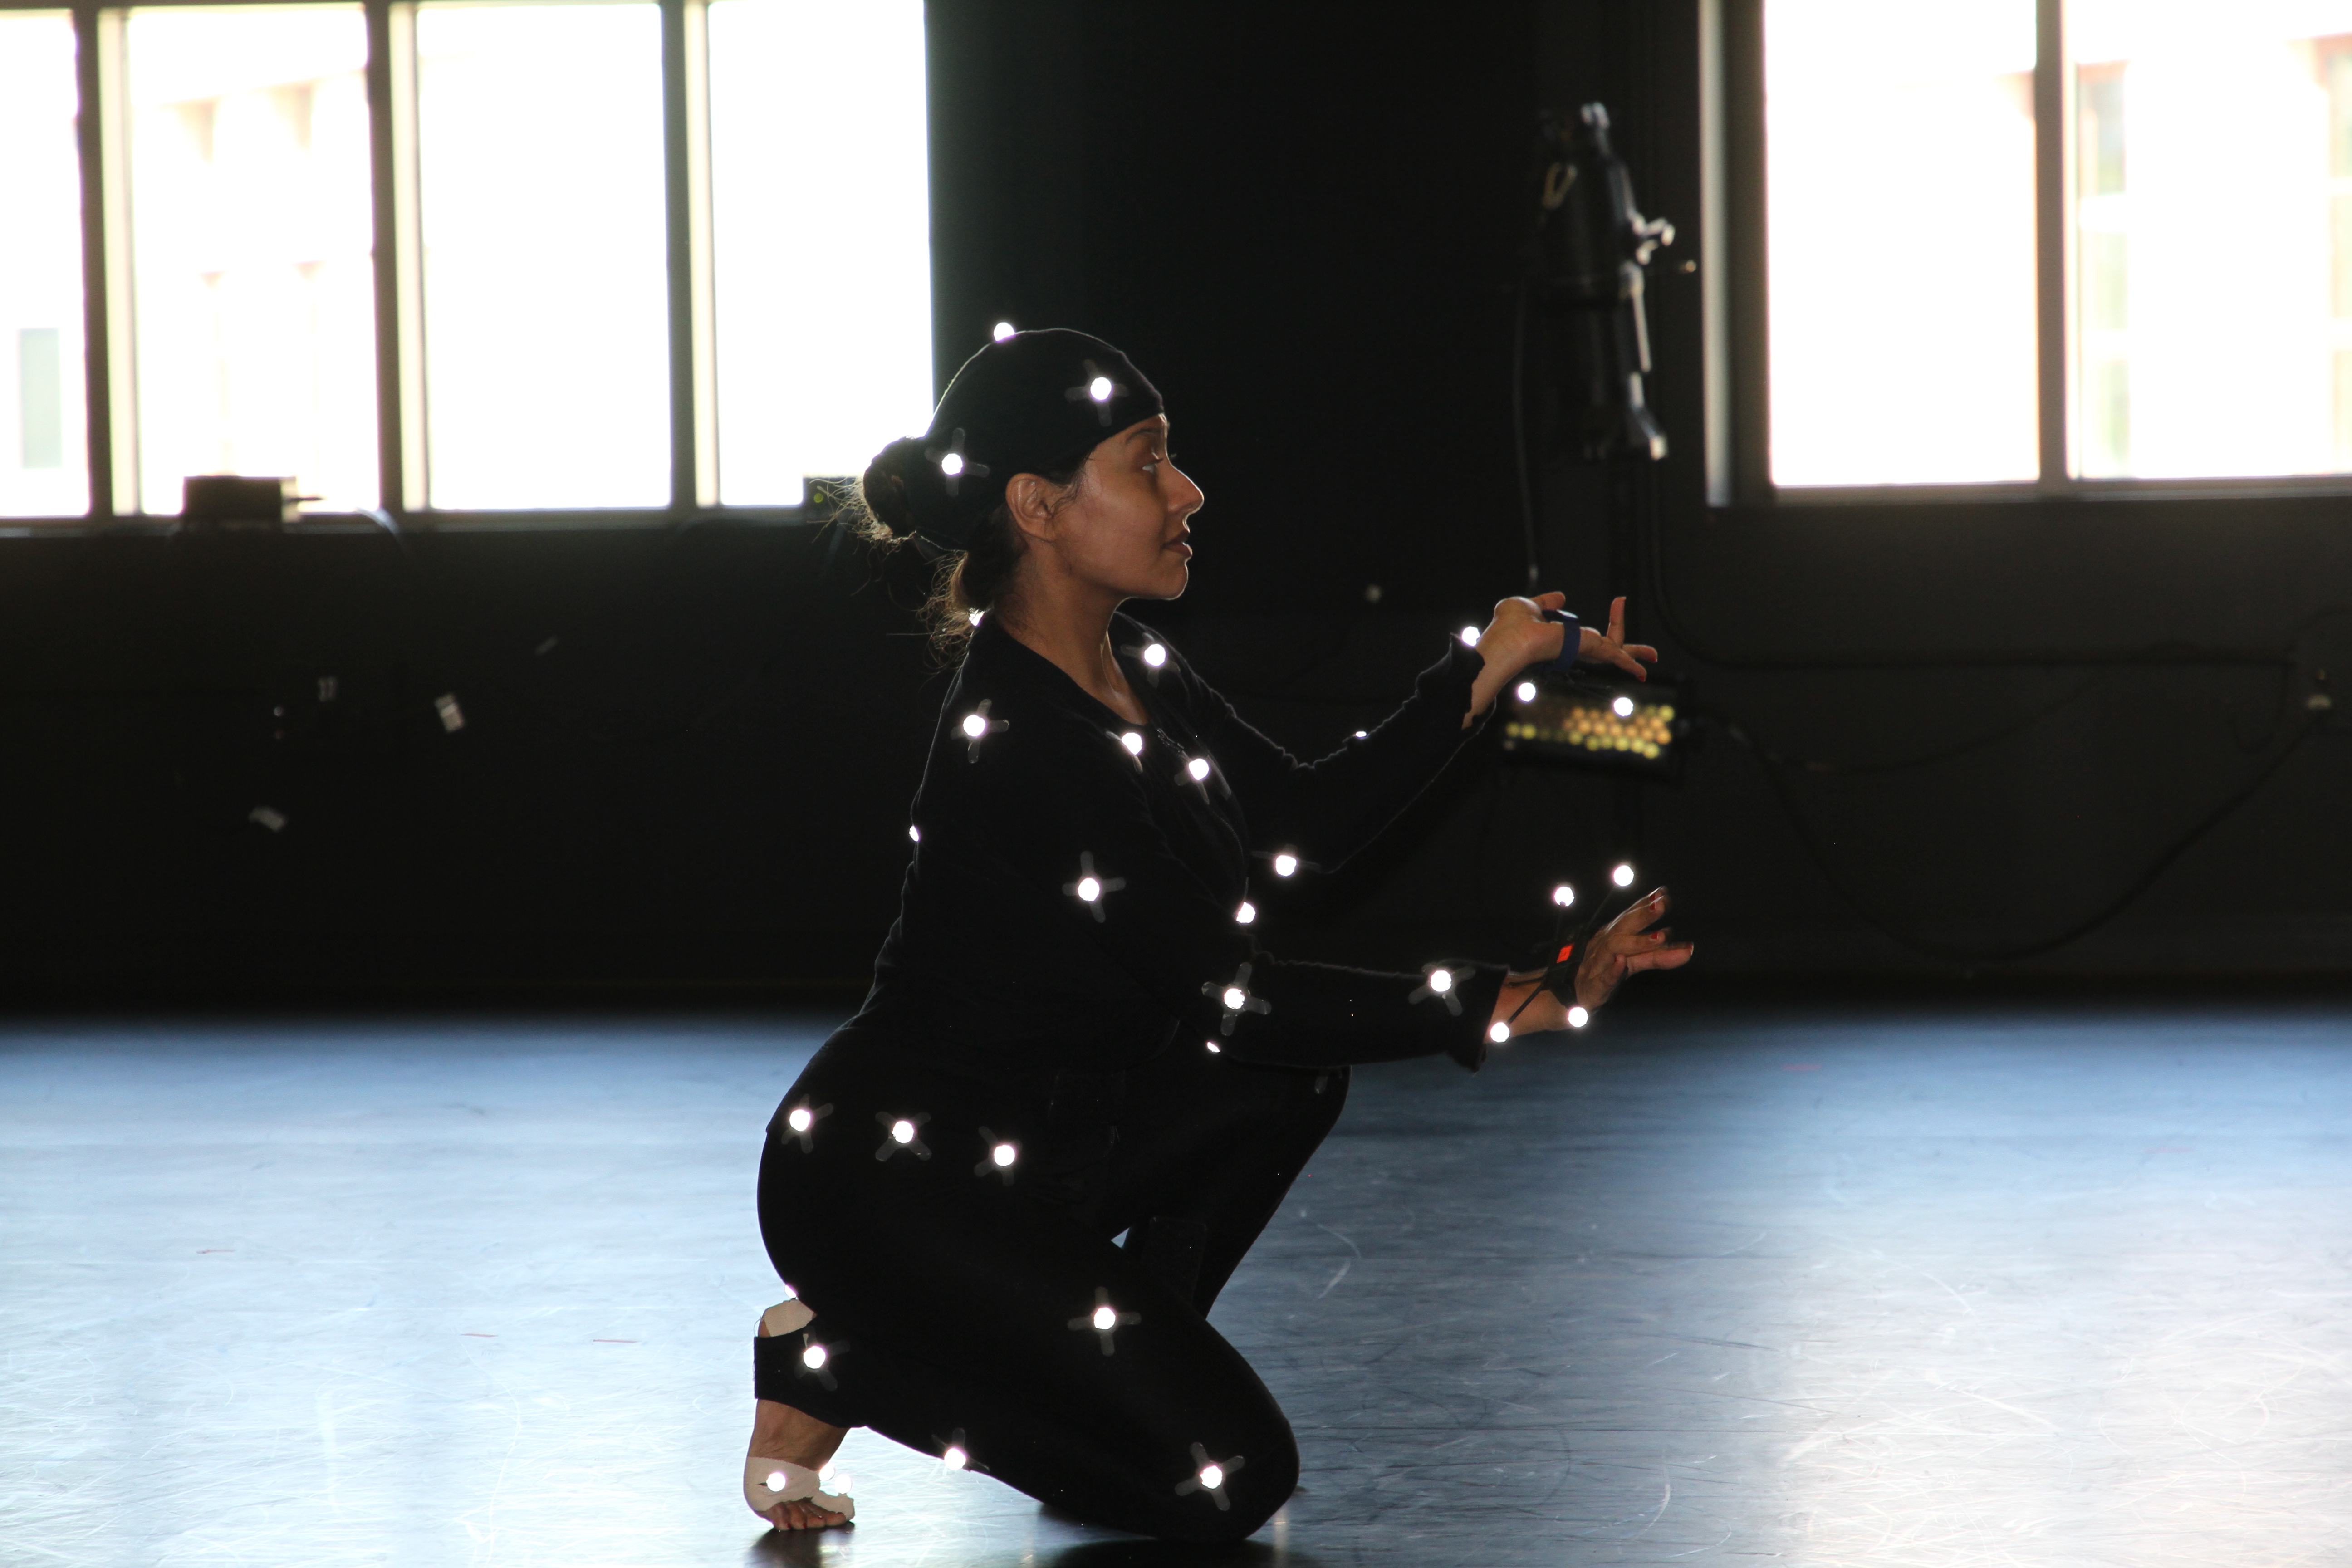 woman wearing black dancing, on her knee; small lights are placed on limbs, waist, and head